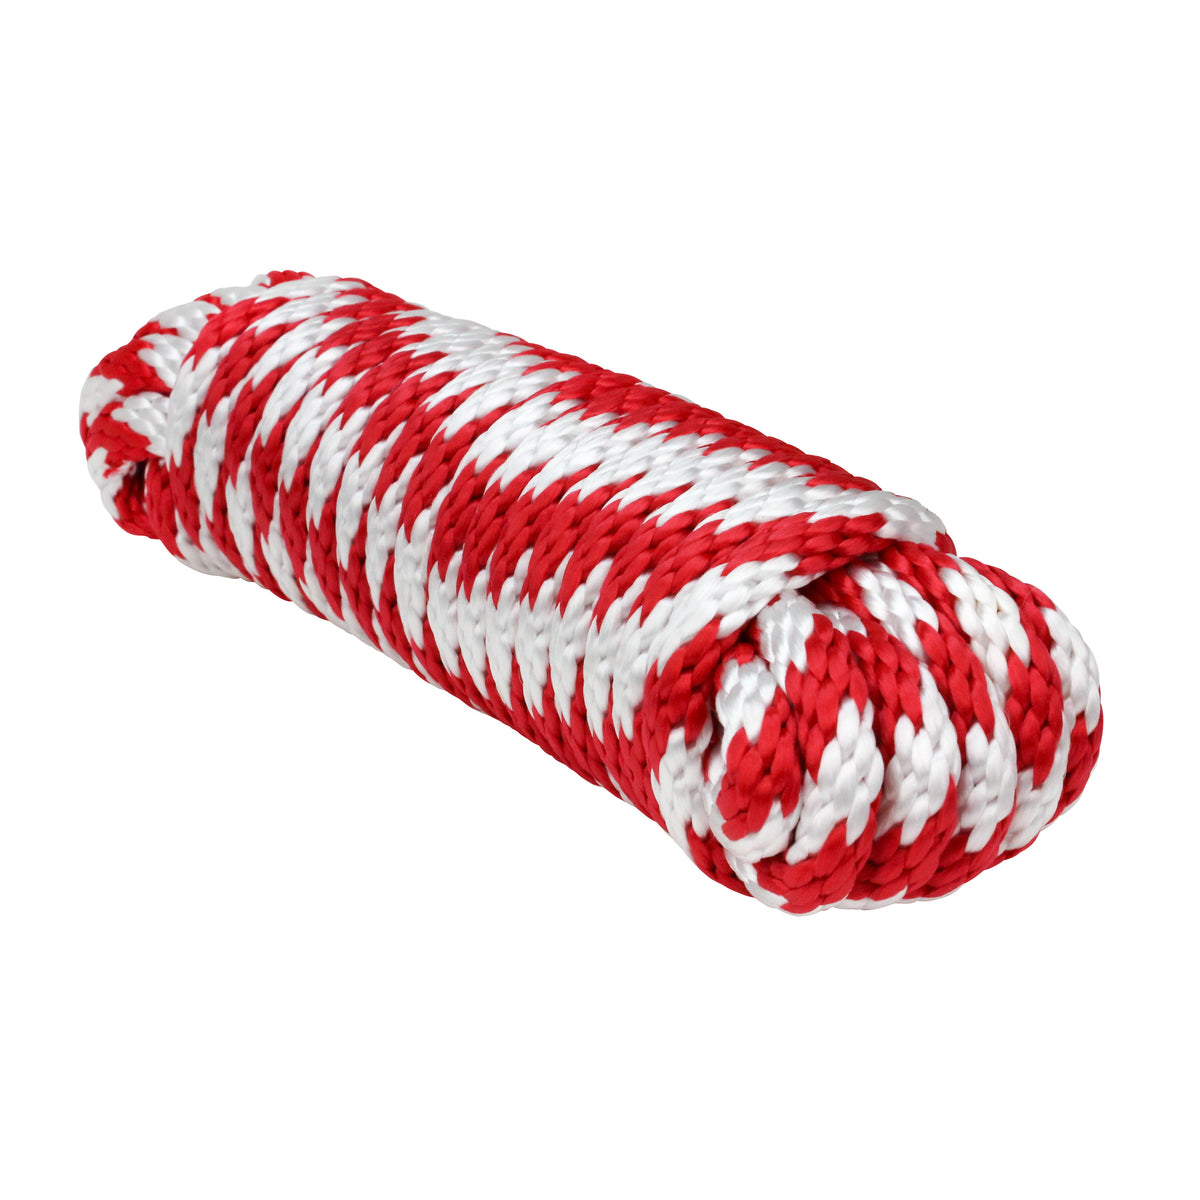 Extreme Max 3008.0166 Solid Braid MFP Utility Rope - 3/8" x 100', Red/White